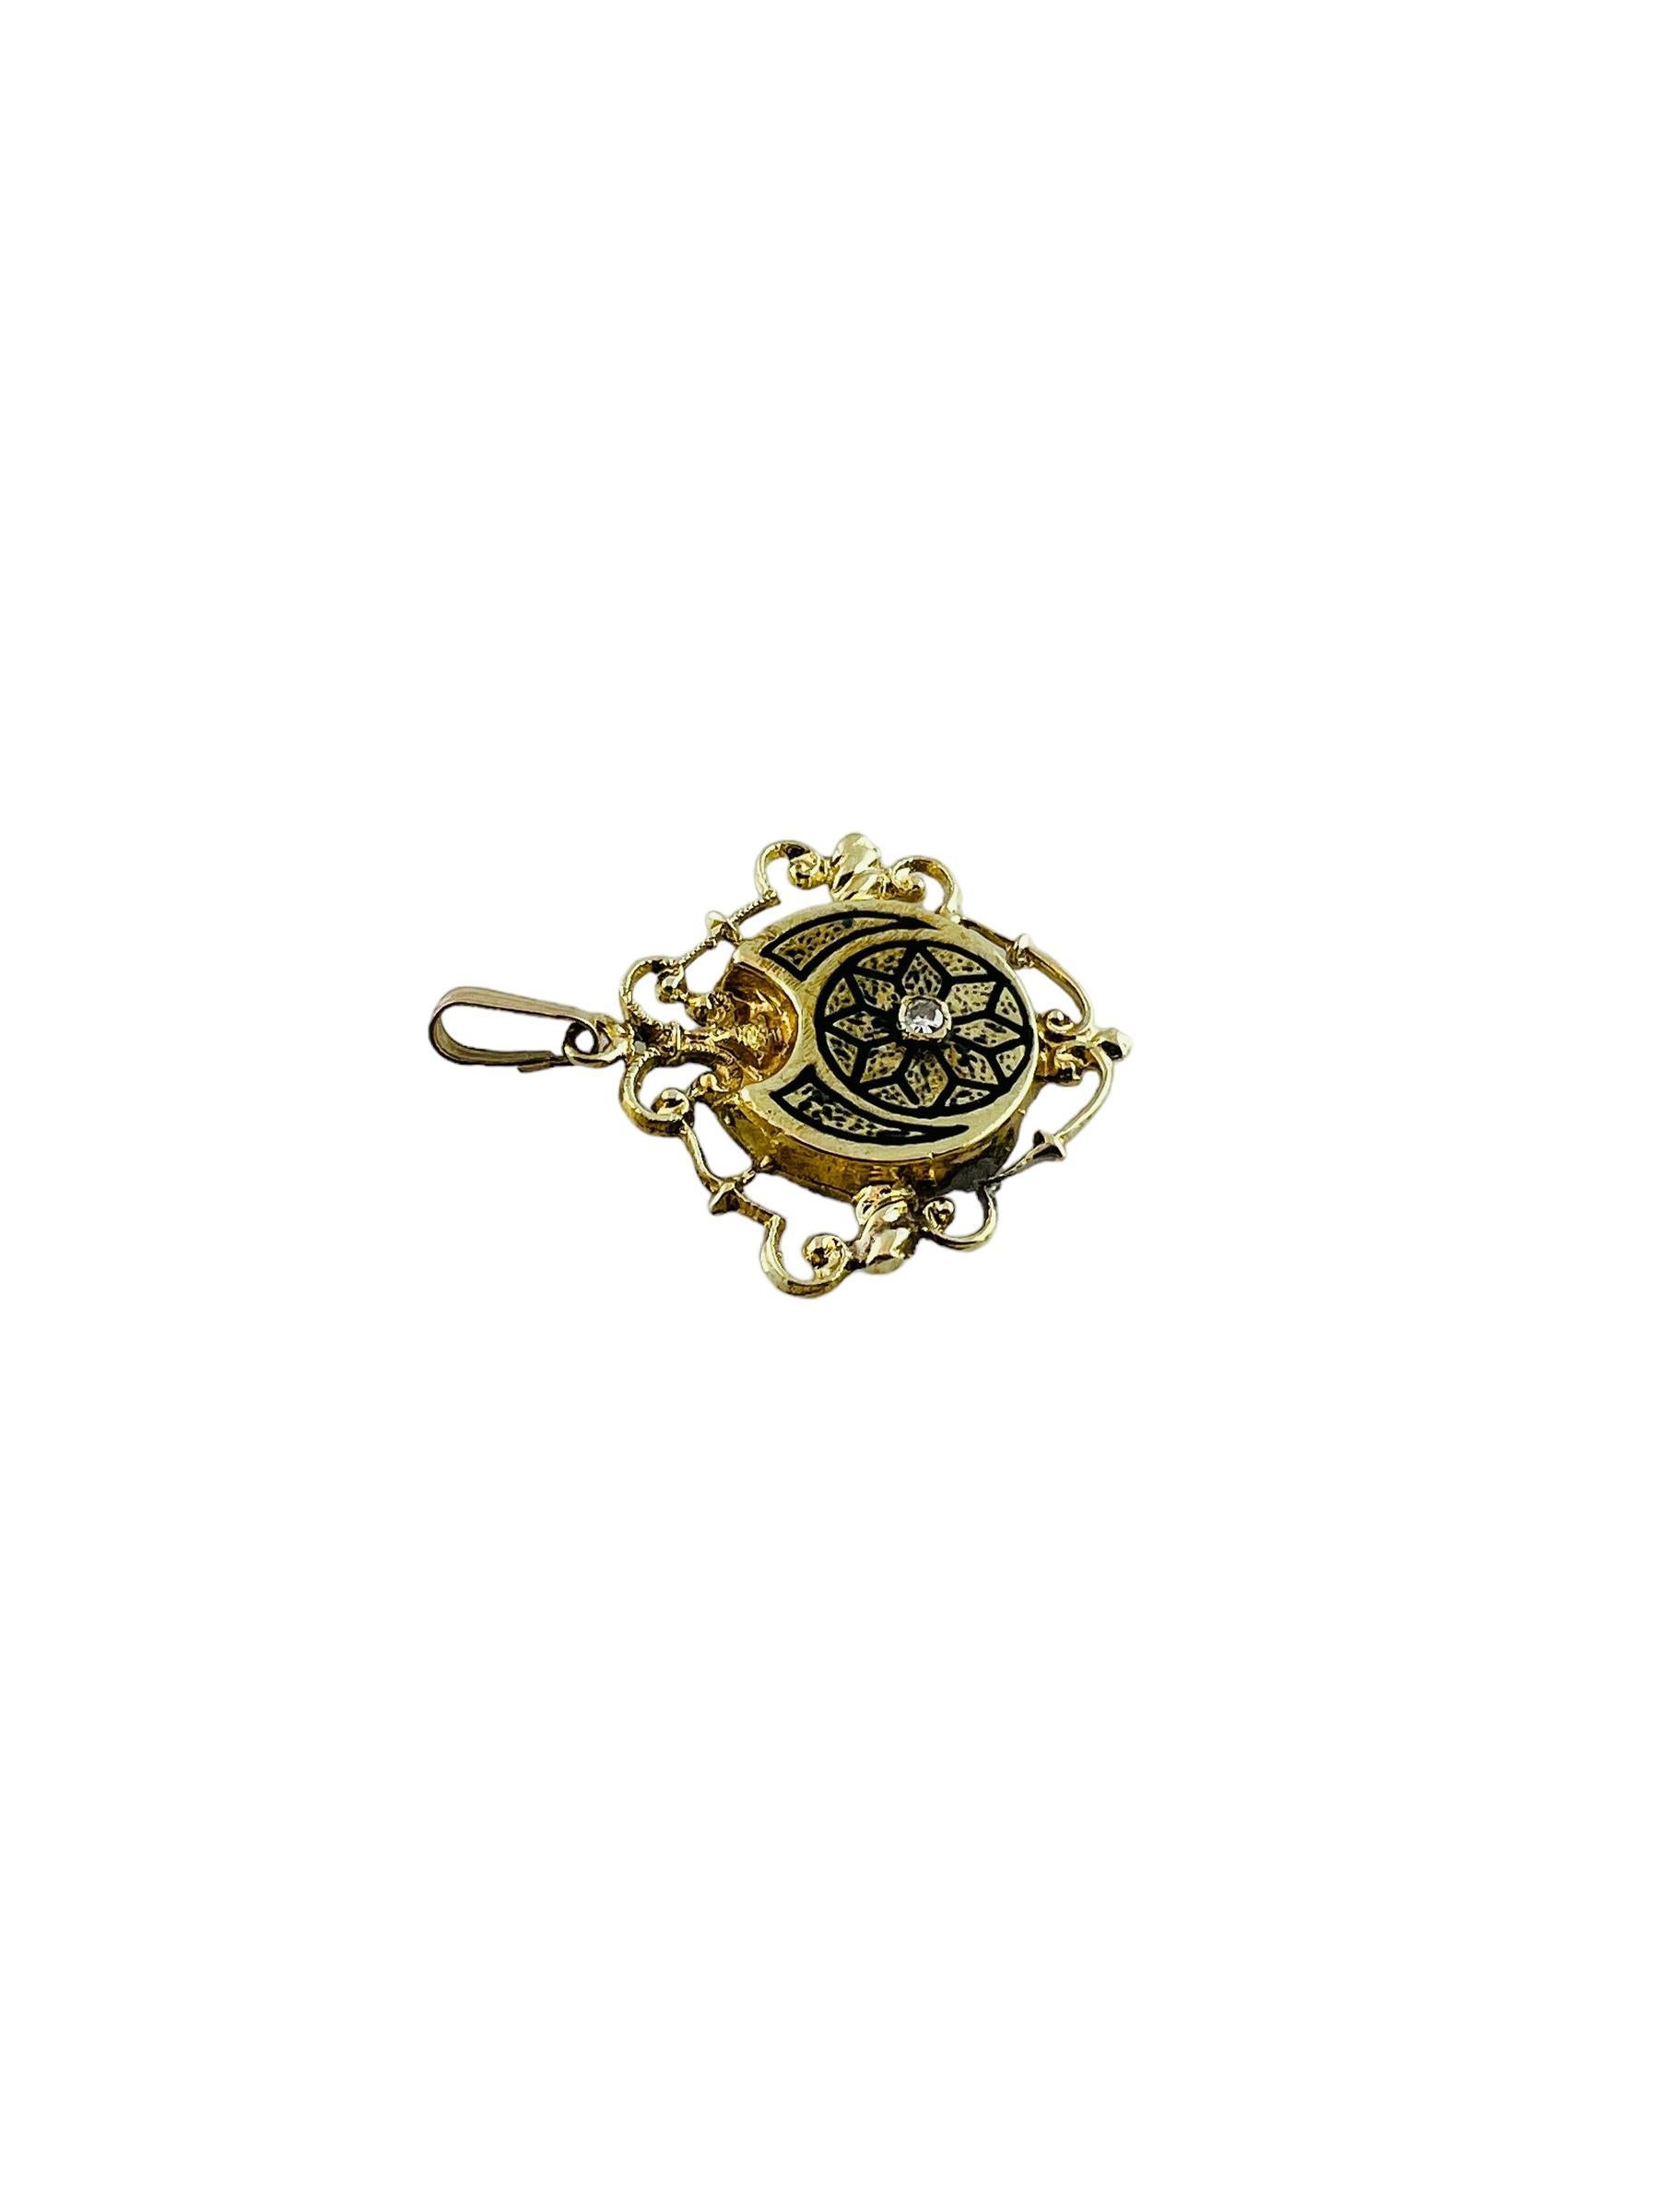 This beautiful yellow gold pendant is accented with black enamel in a flower design with a center single cut diamond.

The pendant has a shield like open design

Stamped 14K 83

Diamond is a single cut stone approx. .03 cts. I1 clarity and H